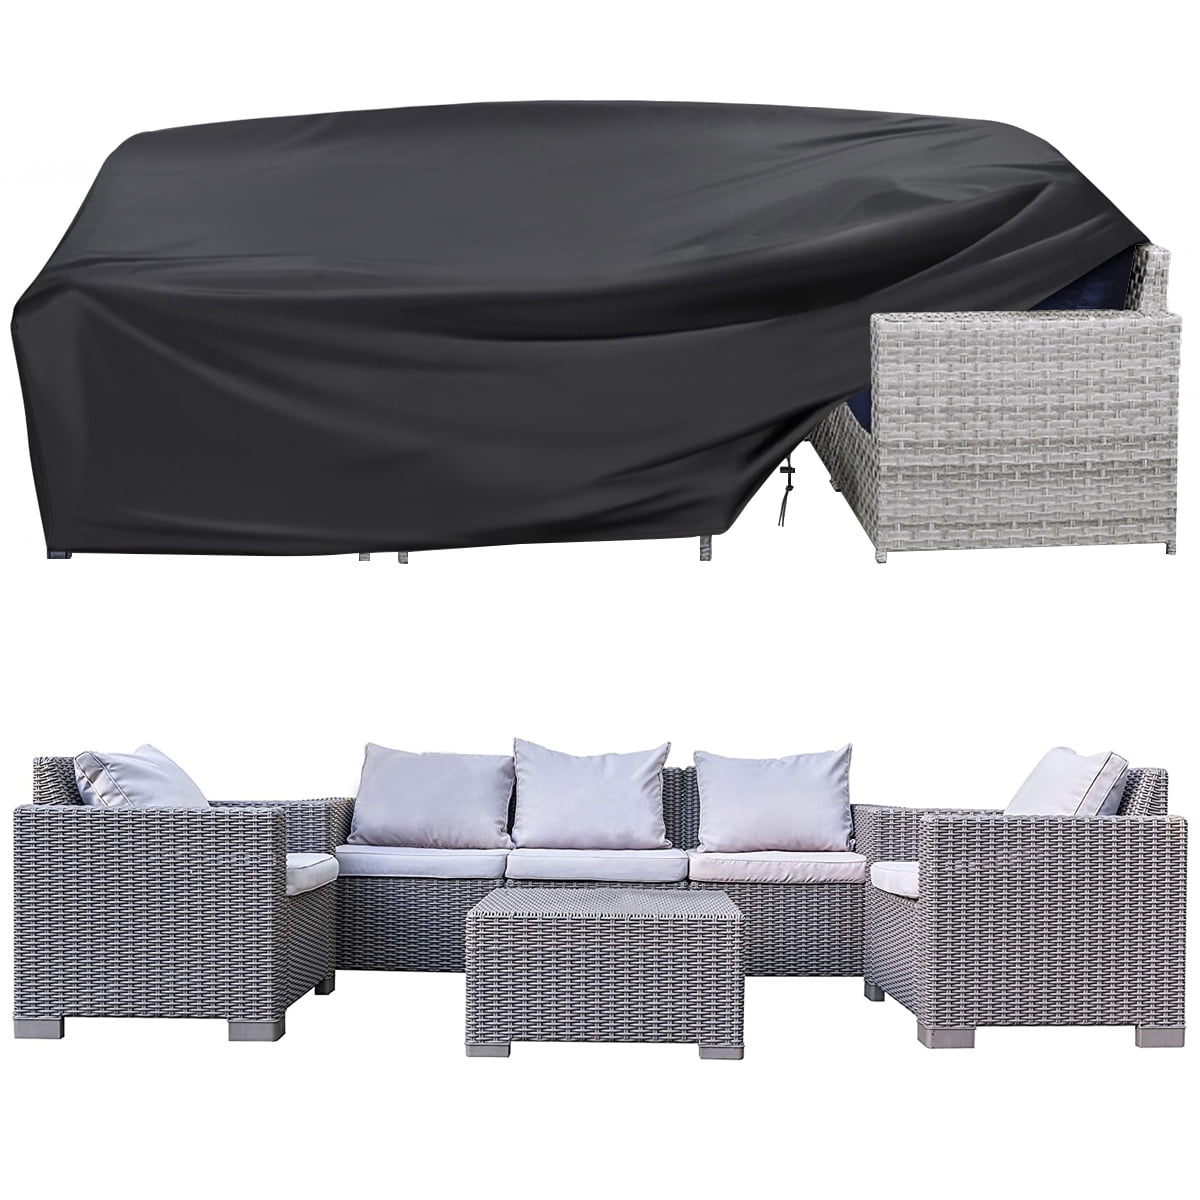 king do way Patio Sofa Cover Waterproof Lounge Set Cover with 6 Windproof Buckles 6 Handles V Shaped 118 x 118 x 35.4 inch Lawn Patio Furniture Cover 